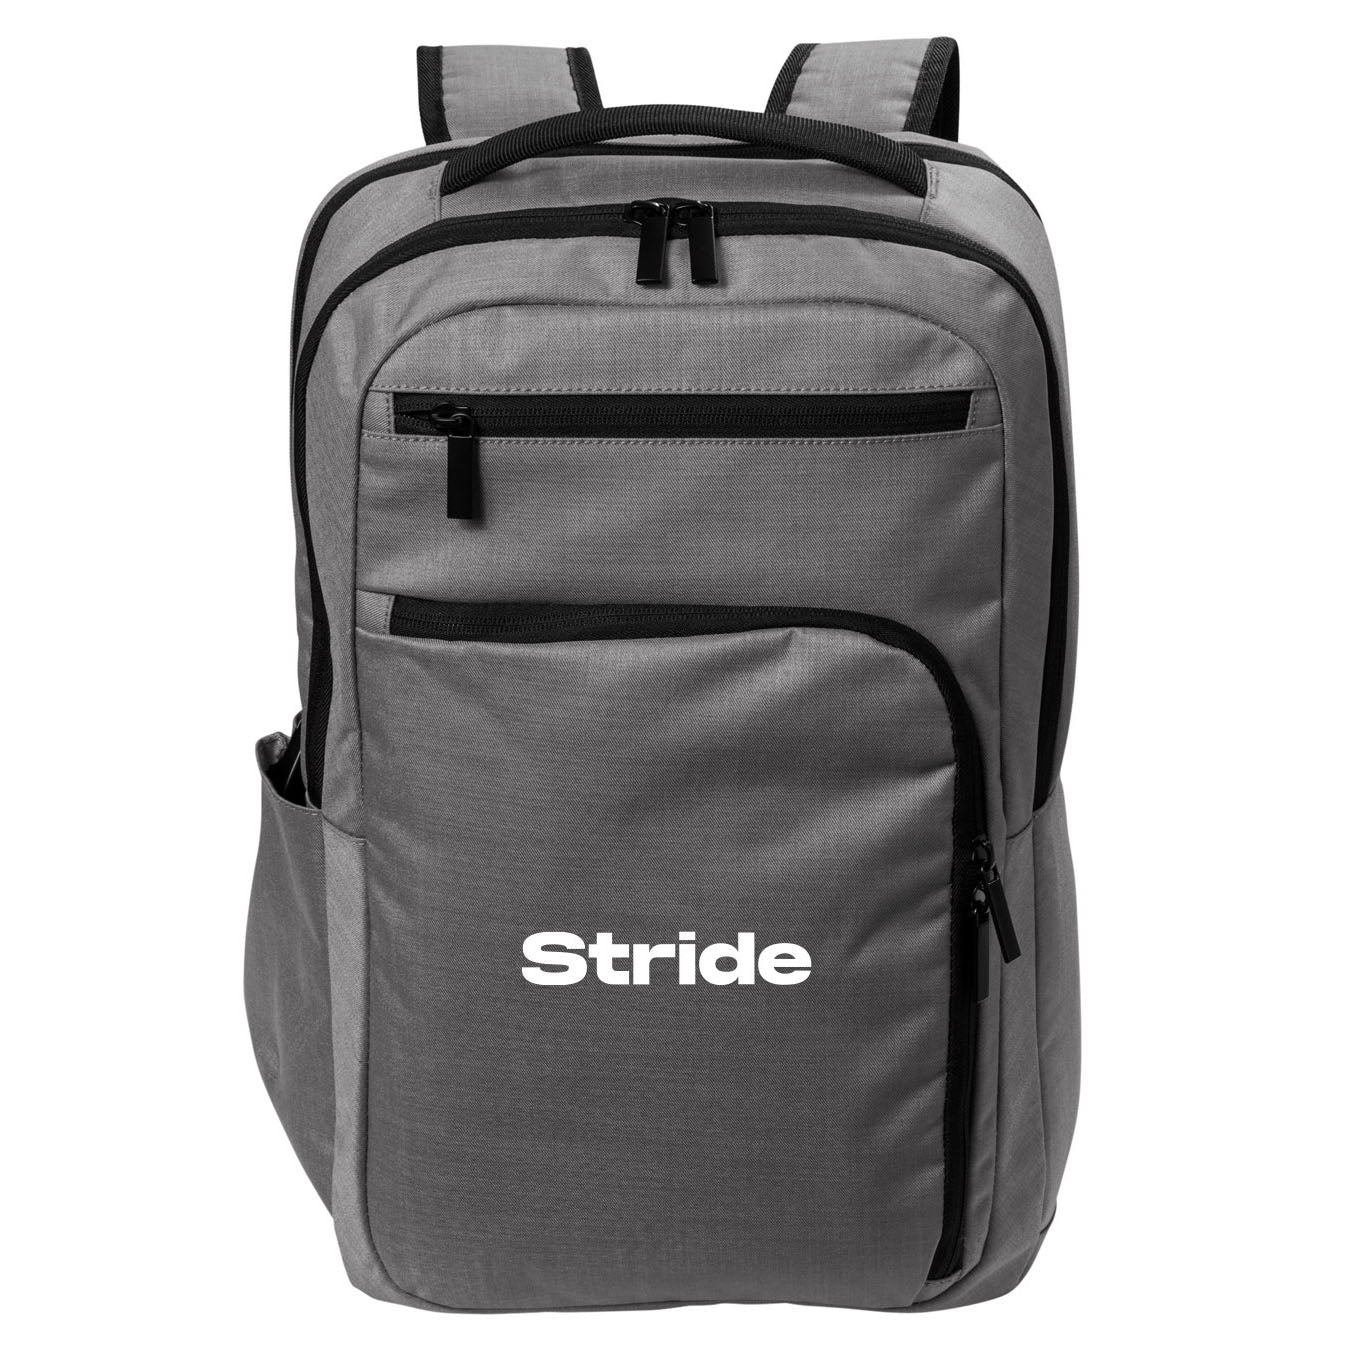 STRIDE LOGO PORT AUTHORITY¨ IMPACT TECH BACKPACK